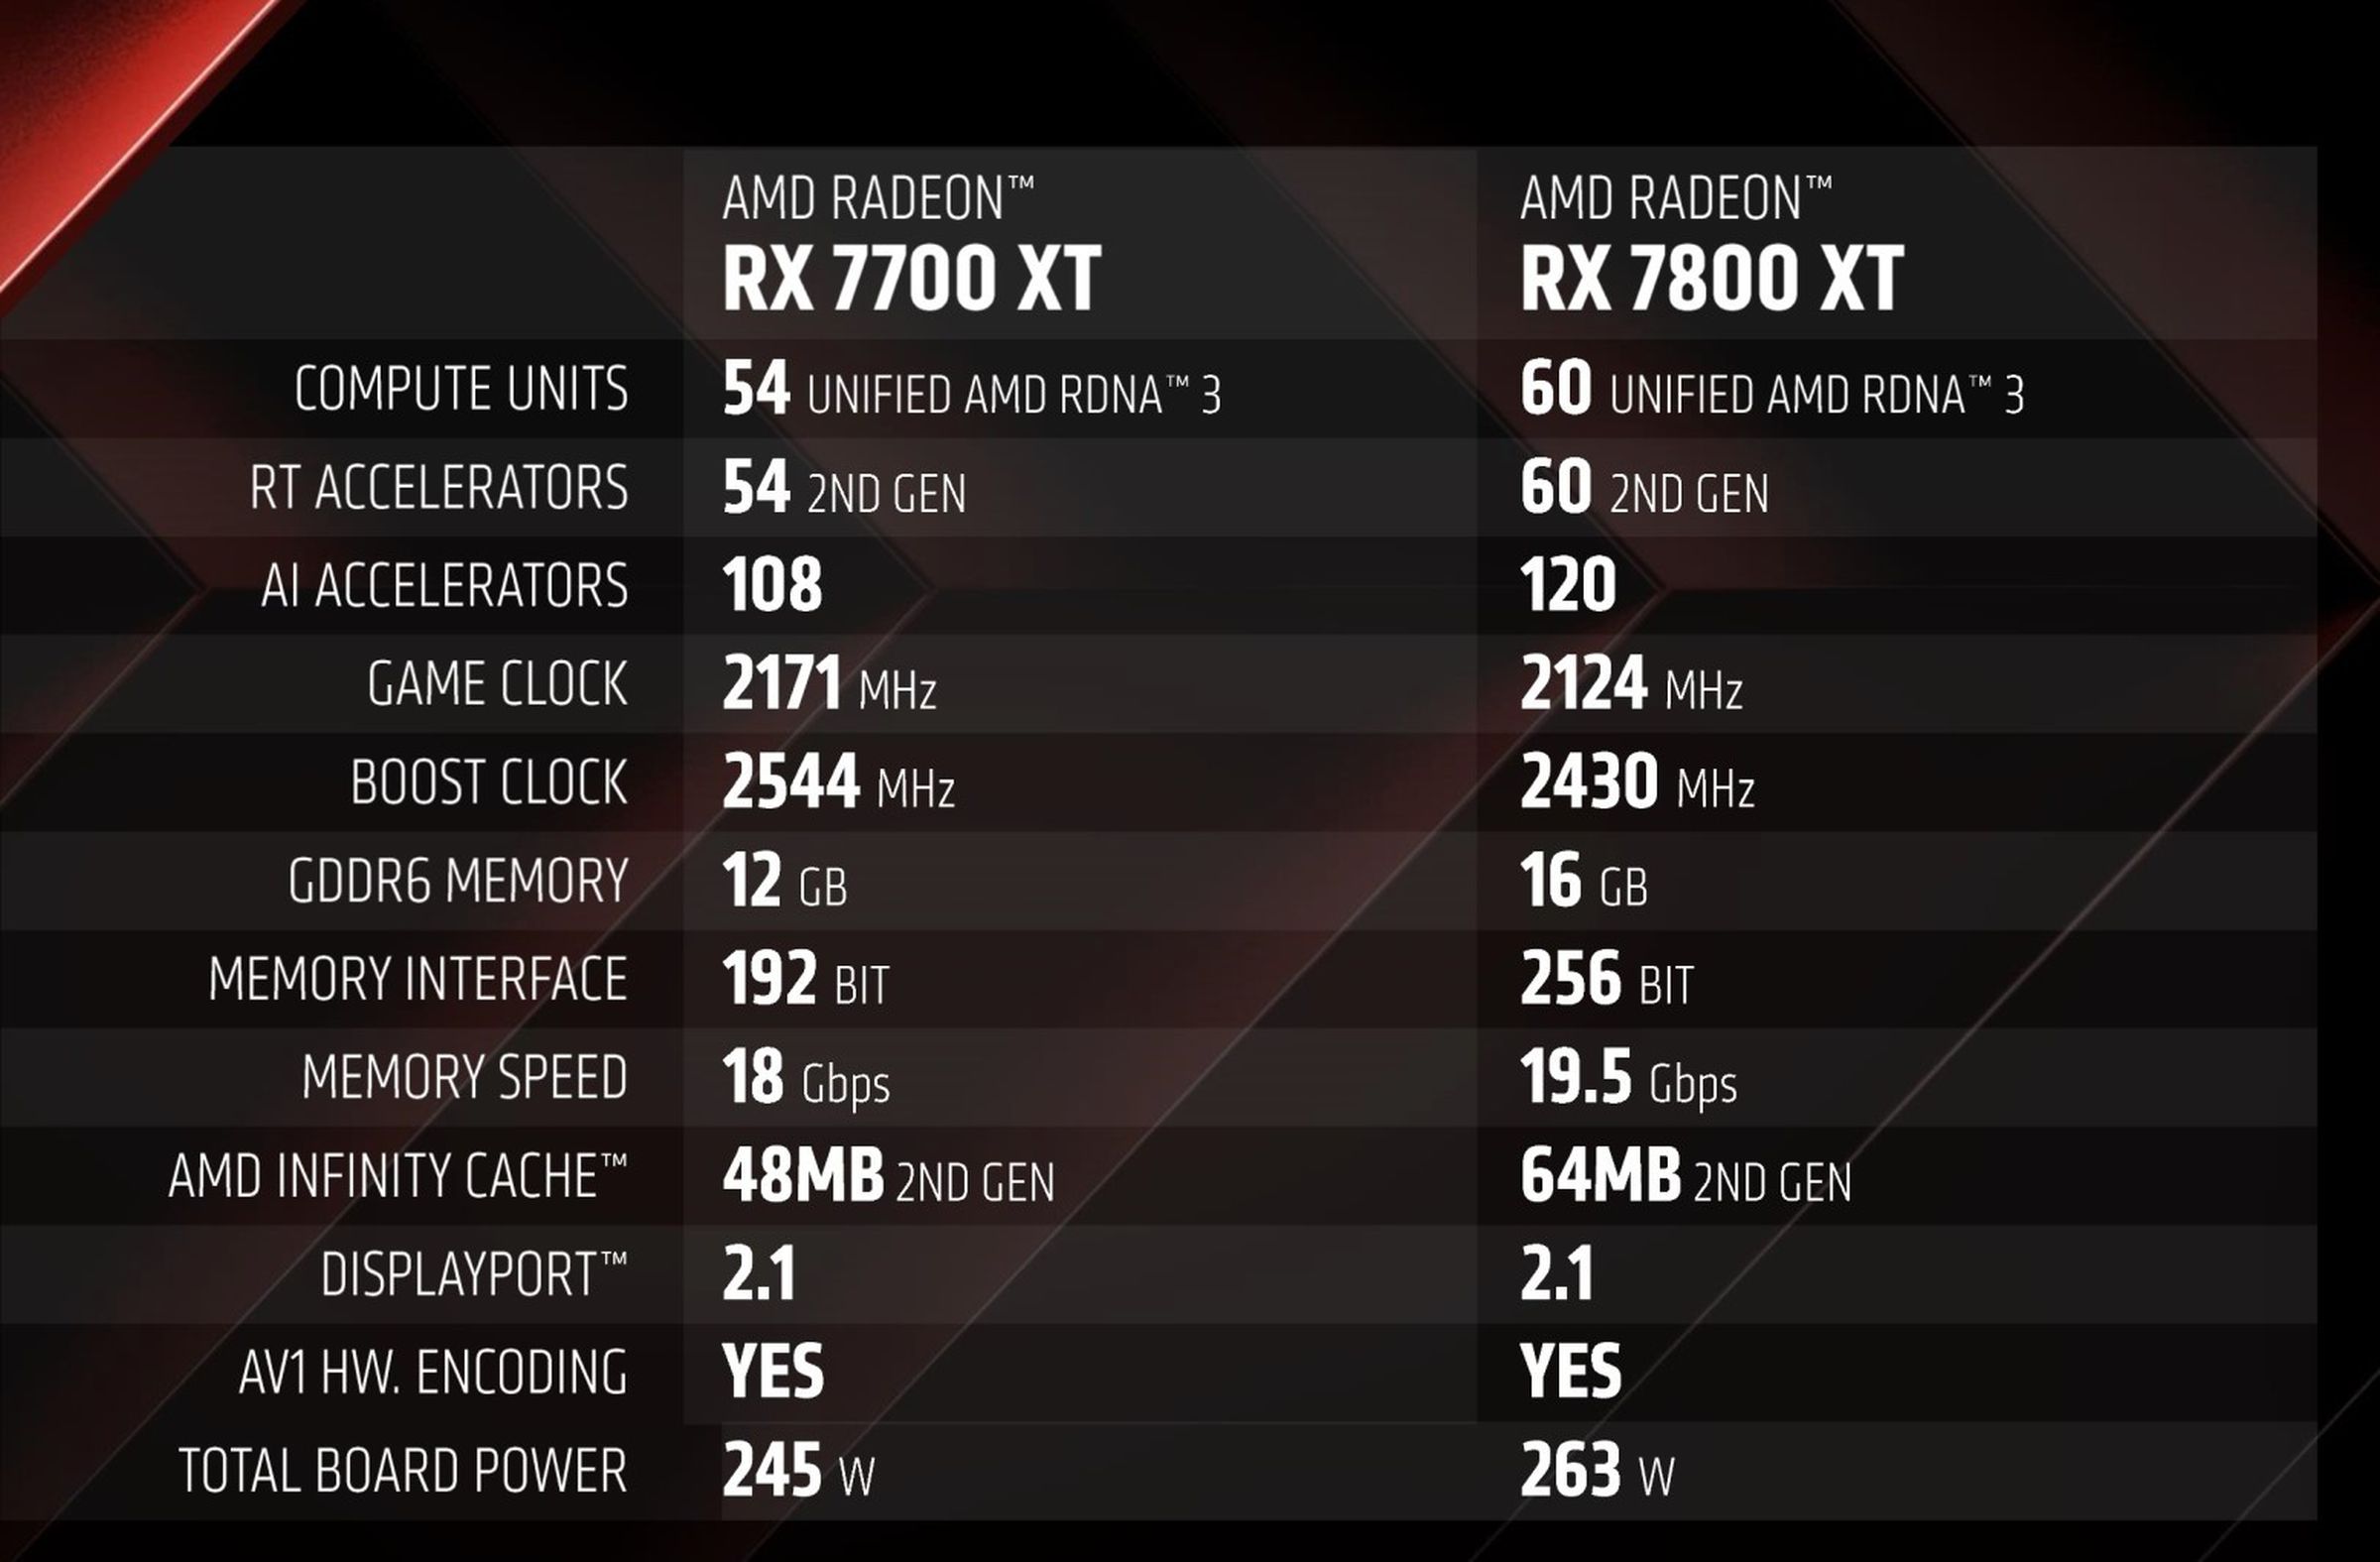 AMD’s specs for the new GPUs.